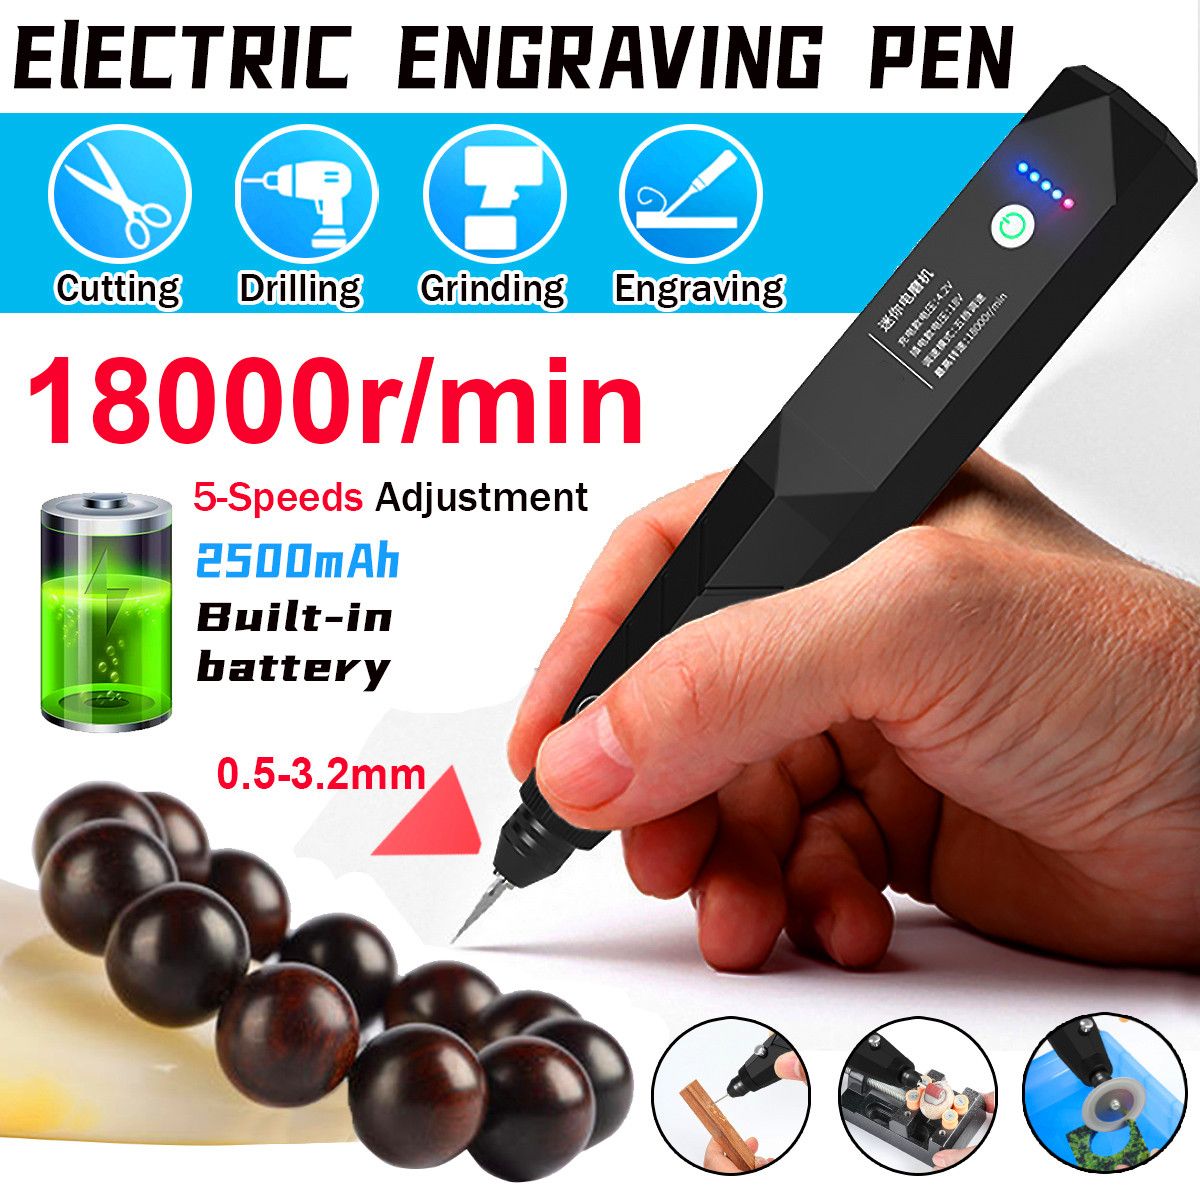 Rechargeable-5-Speed-Power-Adjustable-Electric-Engraving-Pen-18000rMin-Metal-Jade-Carving-Marking-Ma-1750287